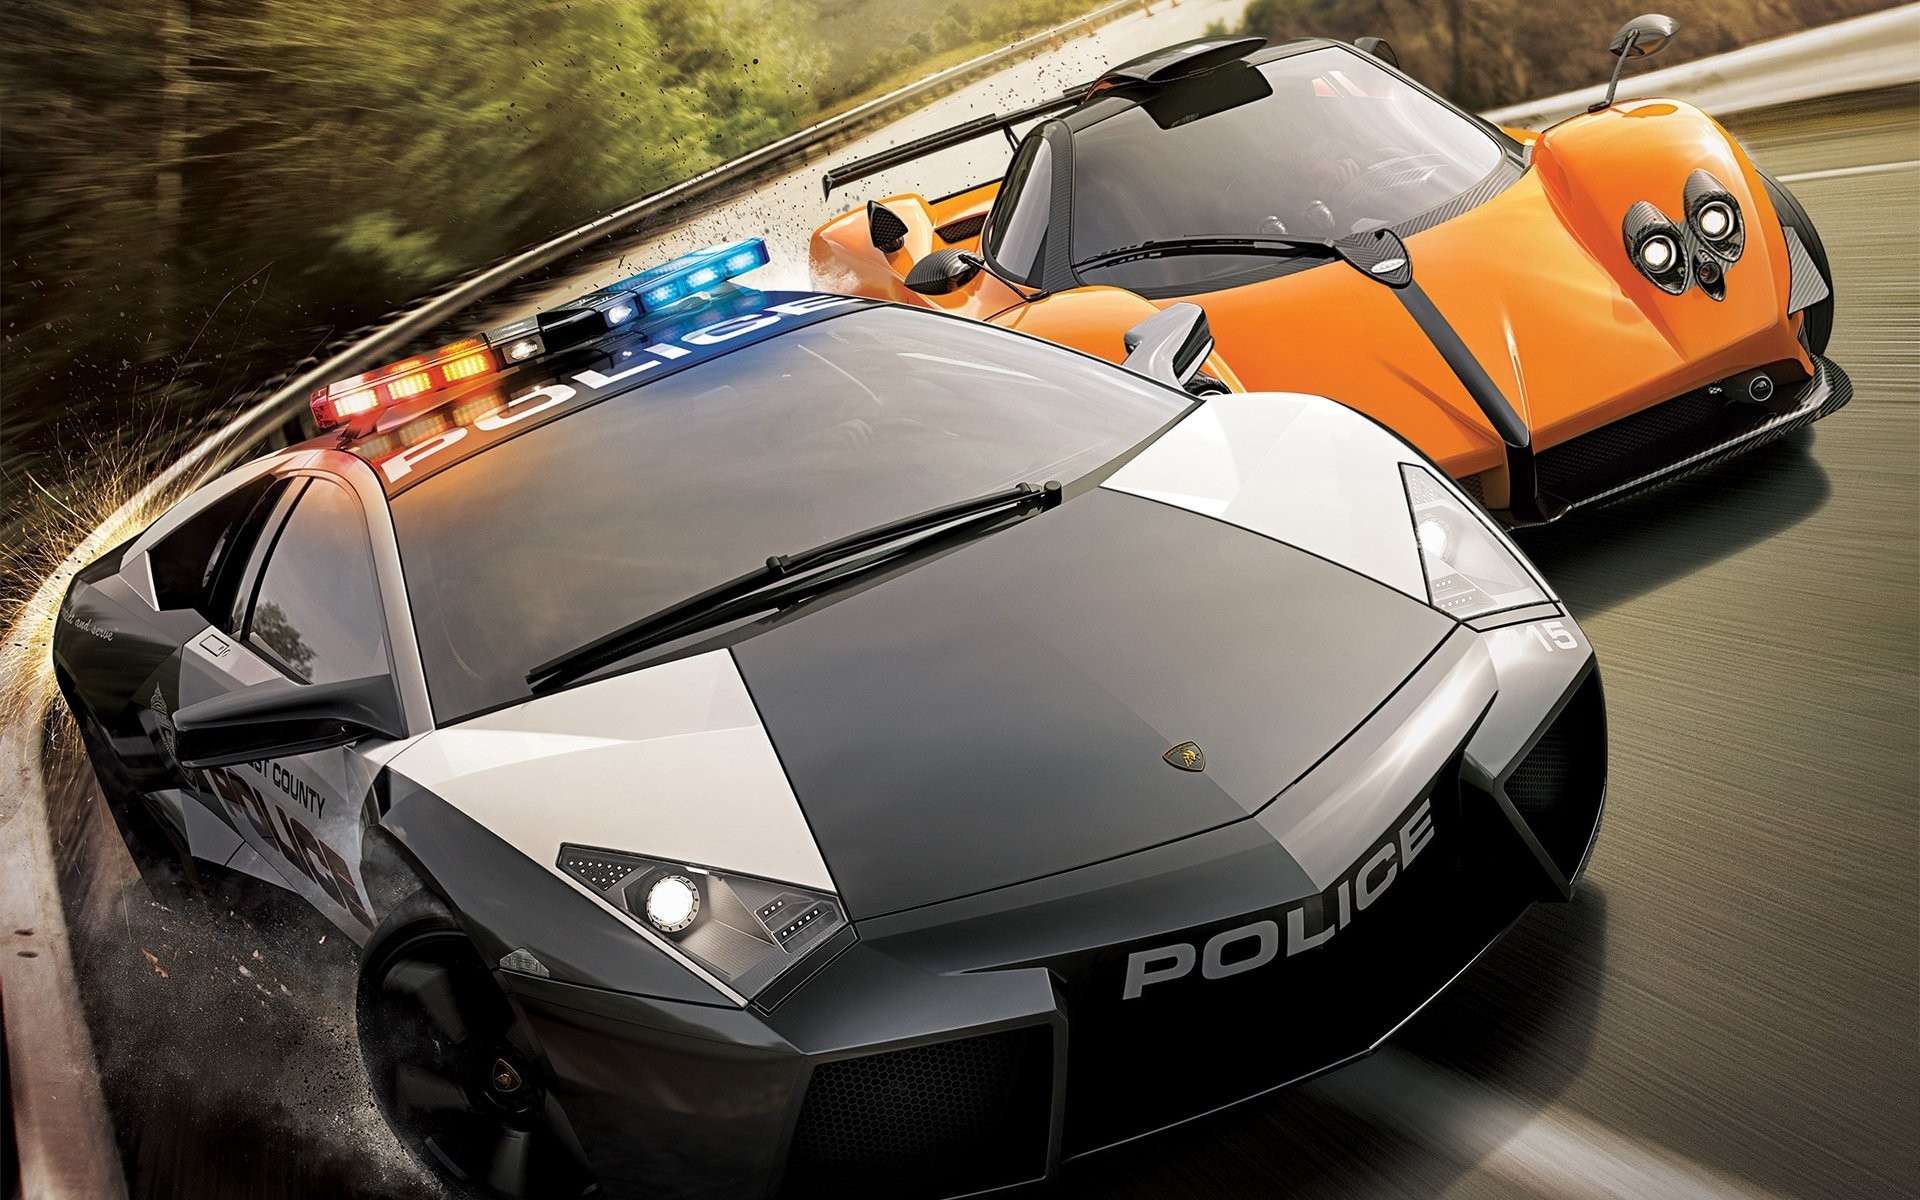 car, Need For Speed, Need For Speed: Hot Pursuit Wallpaper